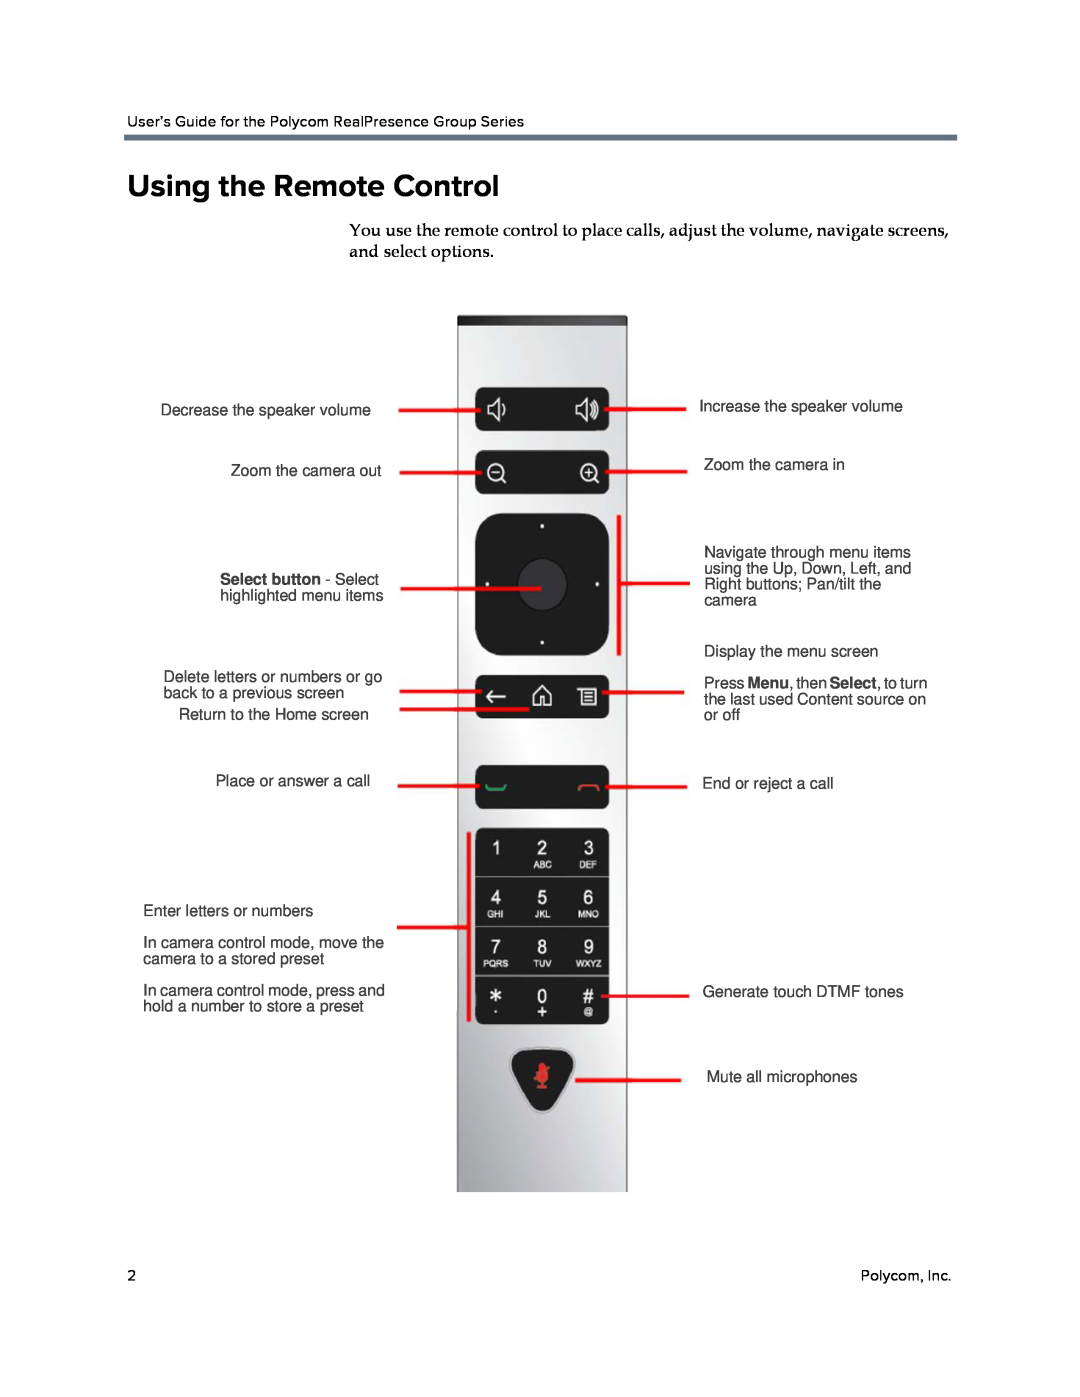 Polycom P001 manual Using the Remote Control, User’s Guide for the Polycom RealPresence Group Series 